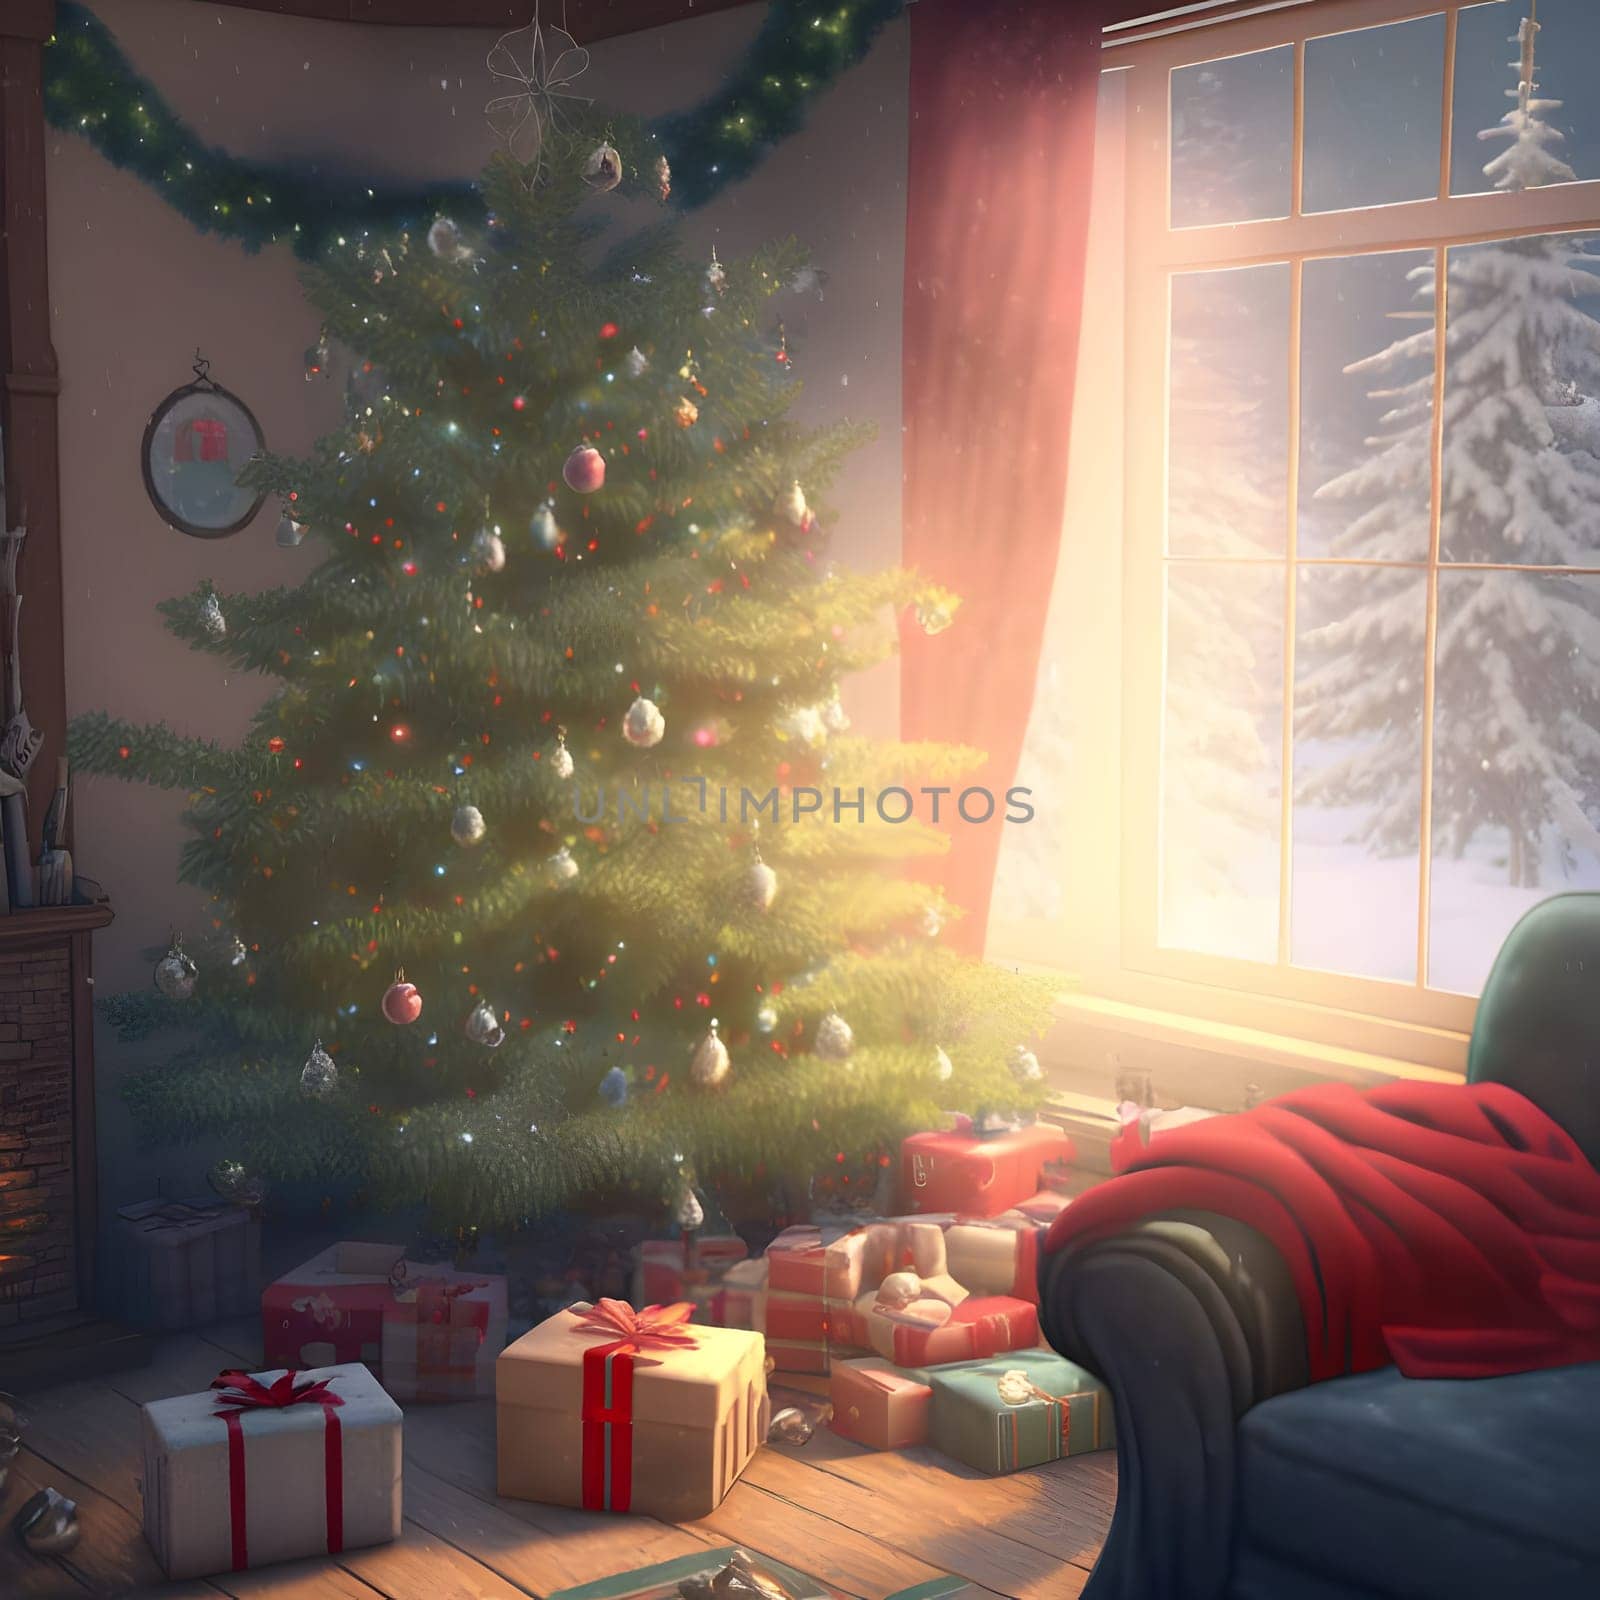 decorated christmas tree with gifts underneath in cozy domestic interior, neural network generated art. Digitally generated image. Not based on any actual scene or pattern.